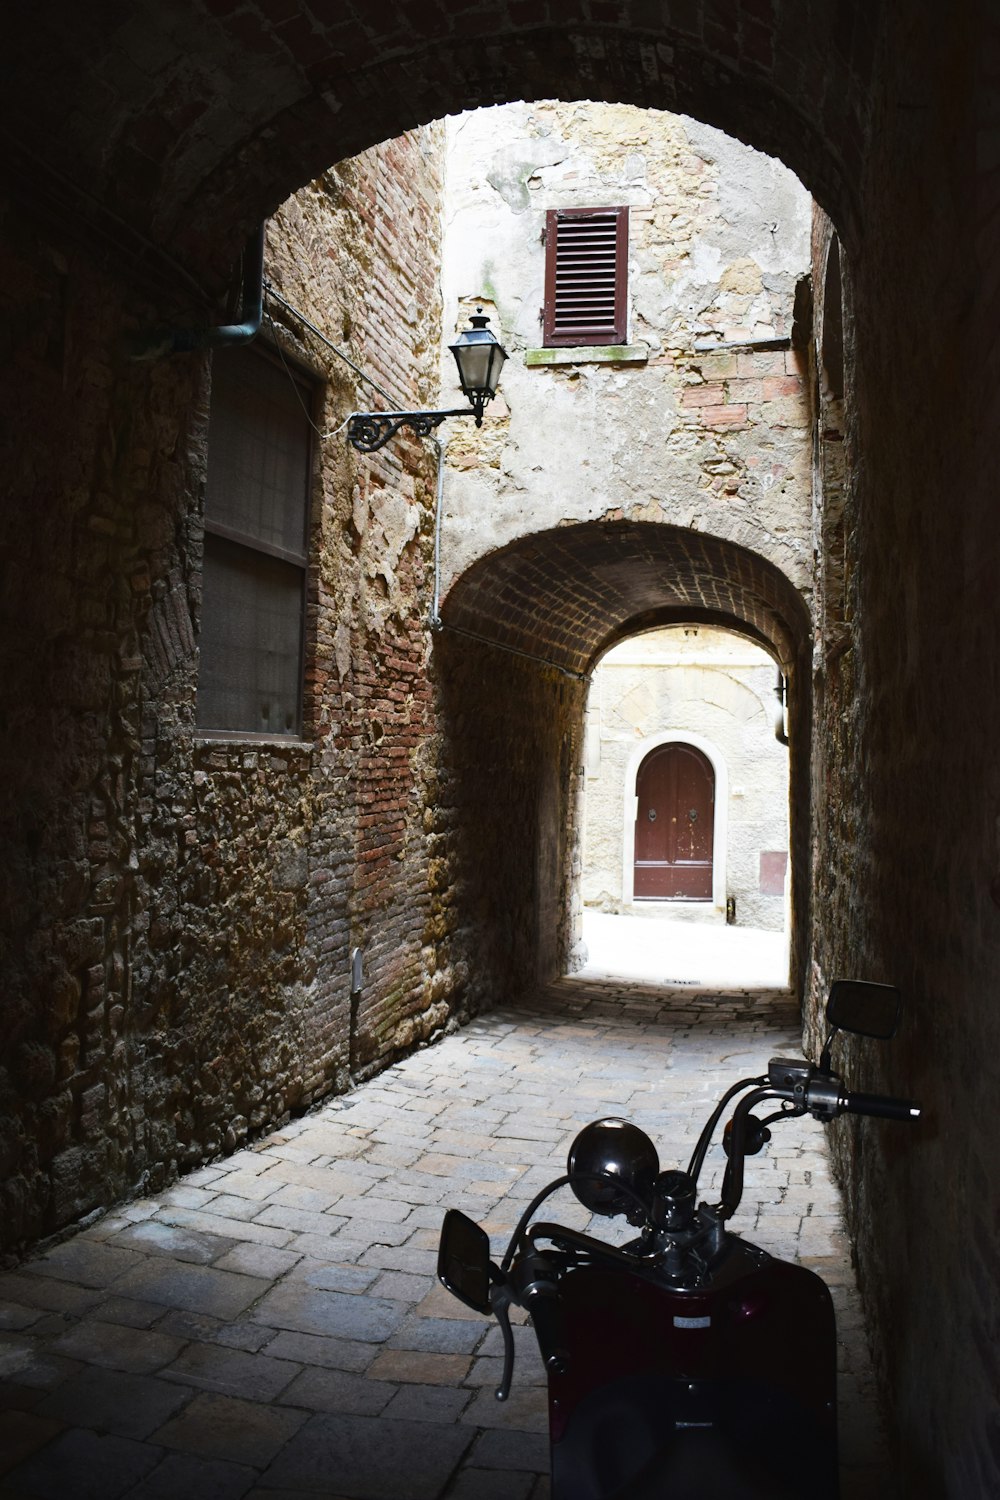 a motorcycle parked in a narrow alley way